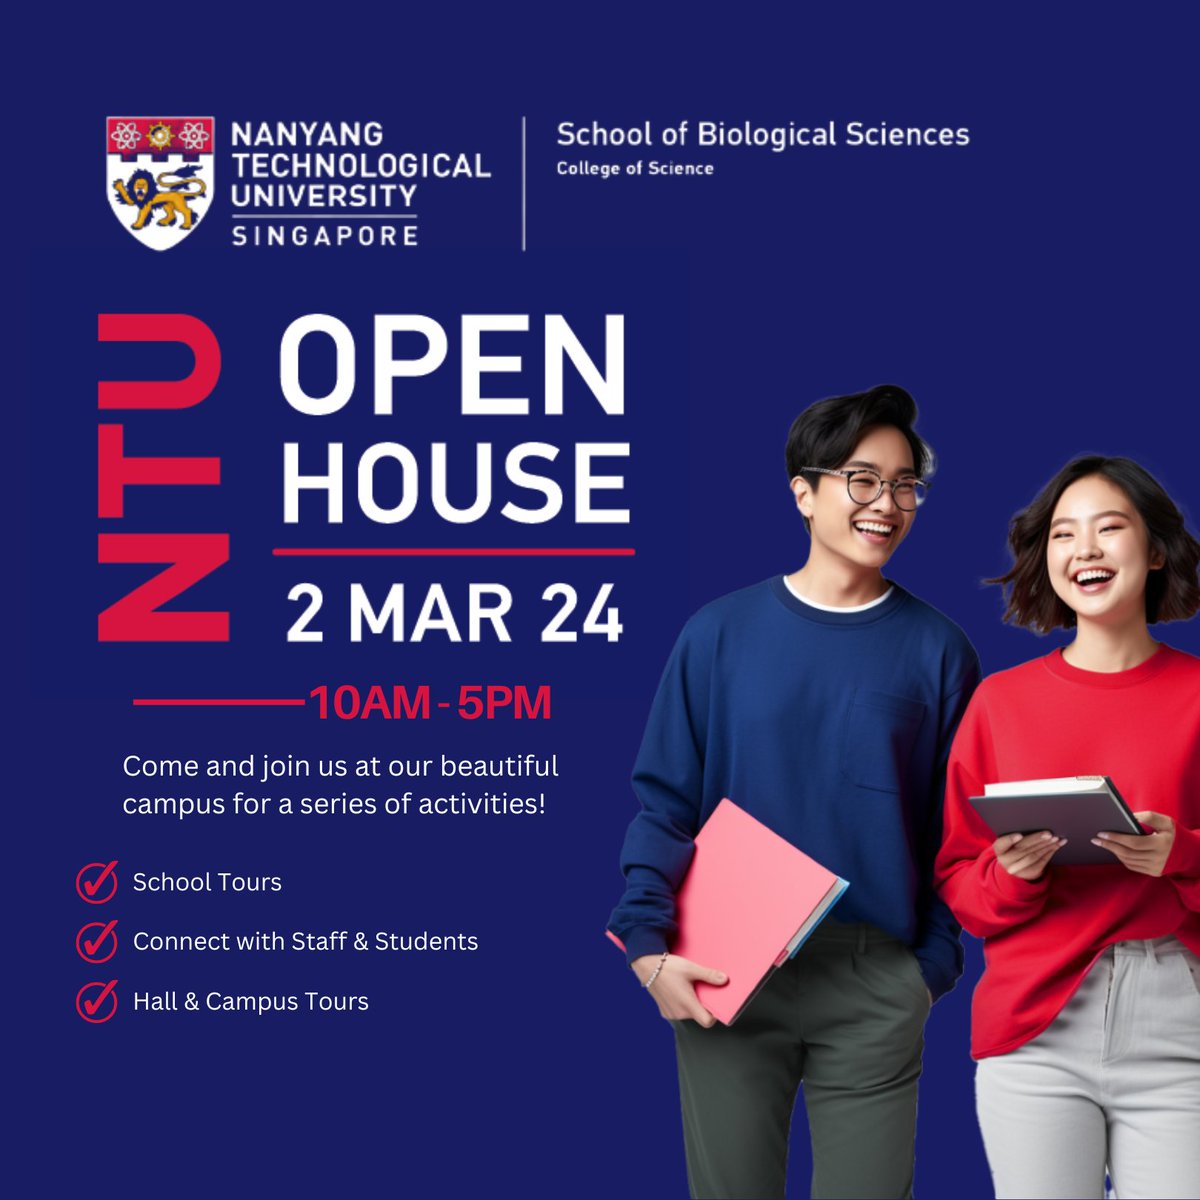 Are you thinking about pursuing biological sciences in uni? Come explore our degrees at SBS, equip yourself with essential skills to navigate the dynamic demands of the global landscape, and pave the way for future professional success after graduation. See you on 2 March!